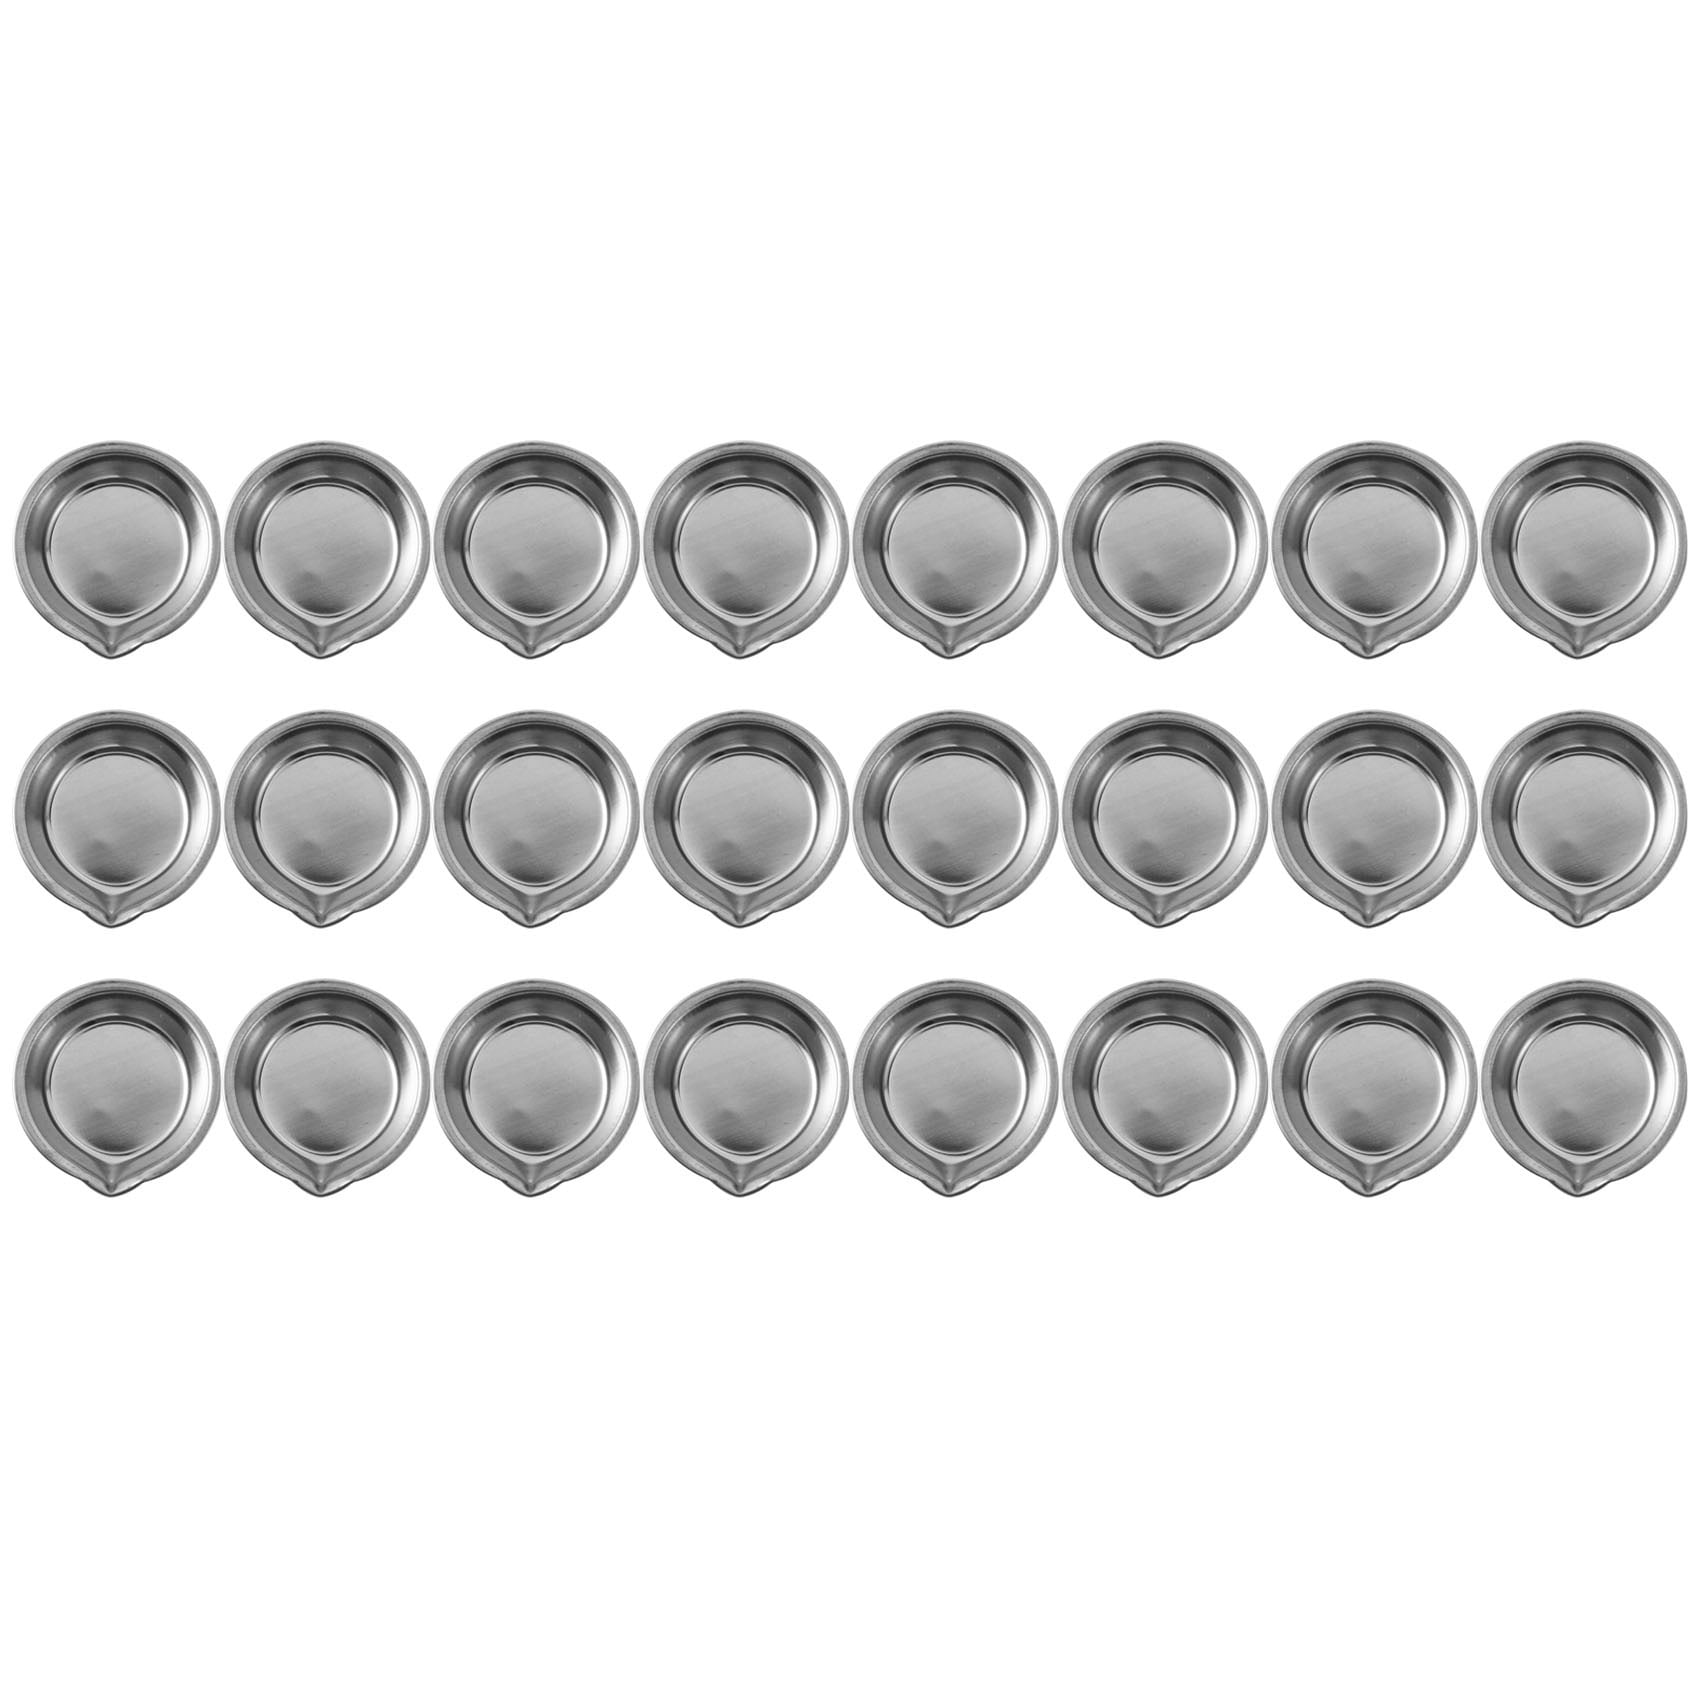 OIAGLH 36Pcs Makeup Palette Stainless Steel Small Round Paint Tray Artist  Watercolours Paint Mixing Palette Tray For Artist 